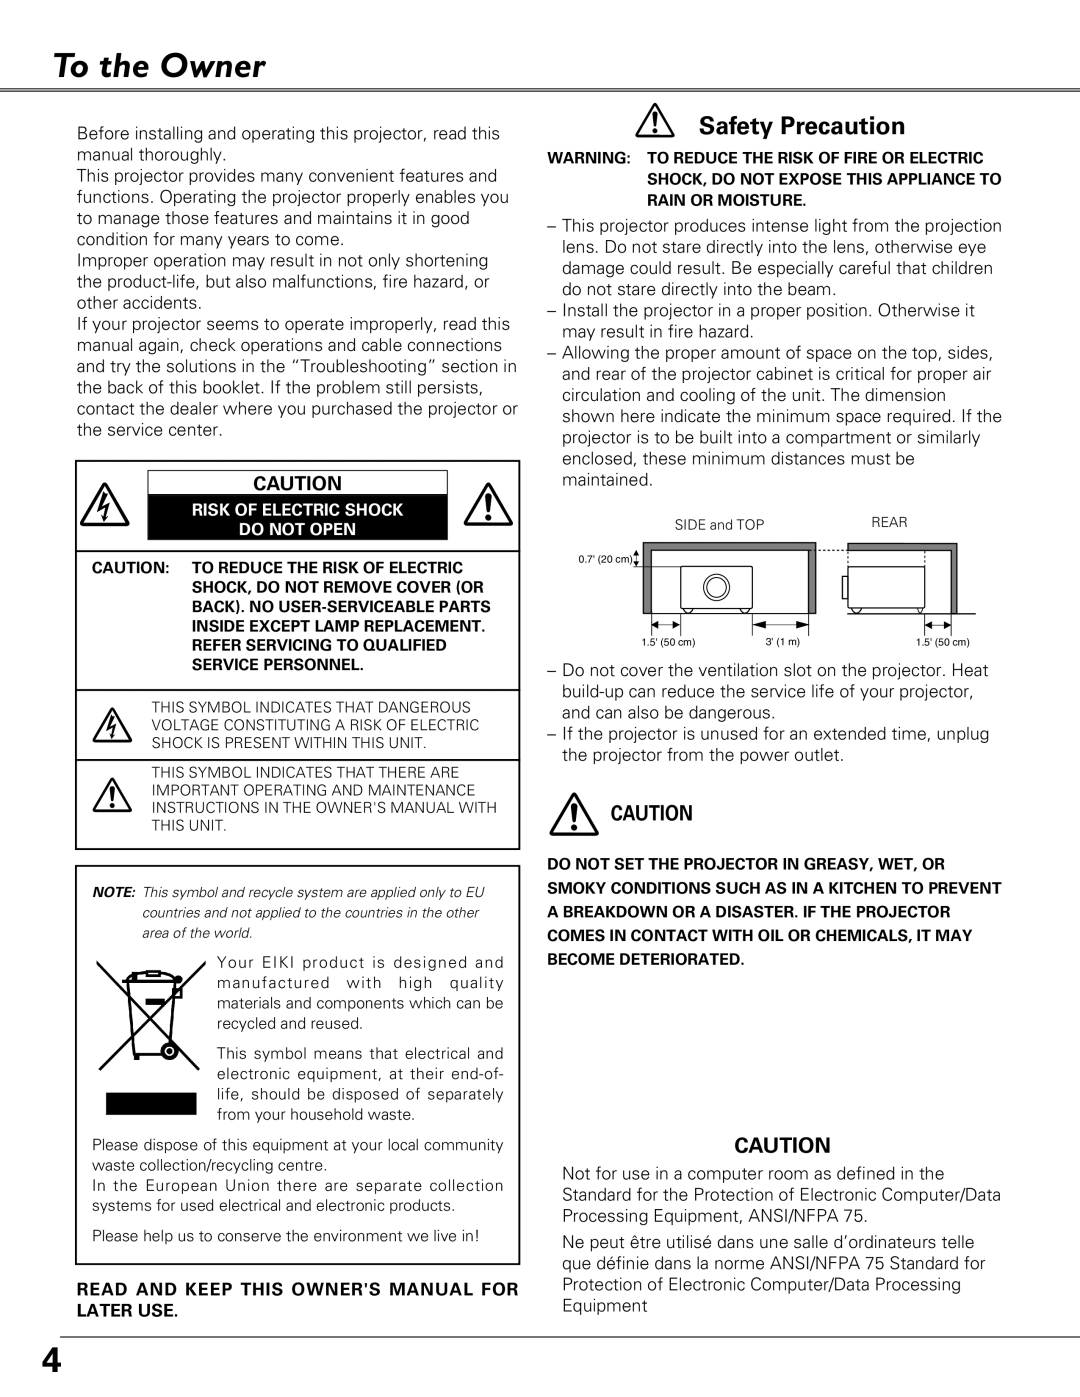 Eiki LC-XB41 owner manual To the Owner, Safety Precaution, Risk Of Electric Shock Do Not Open 